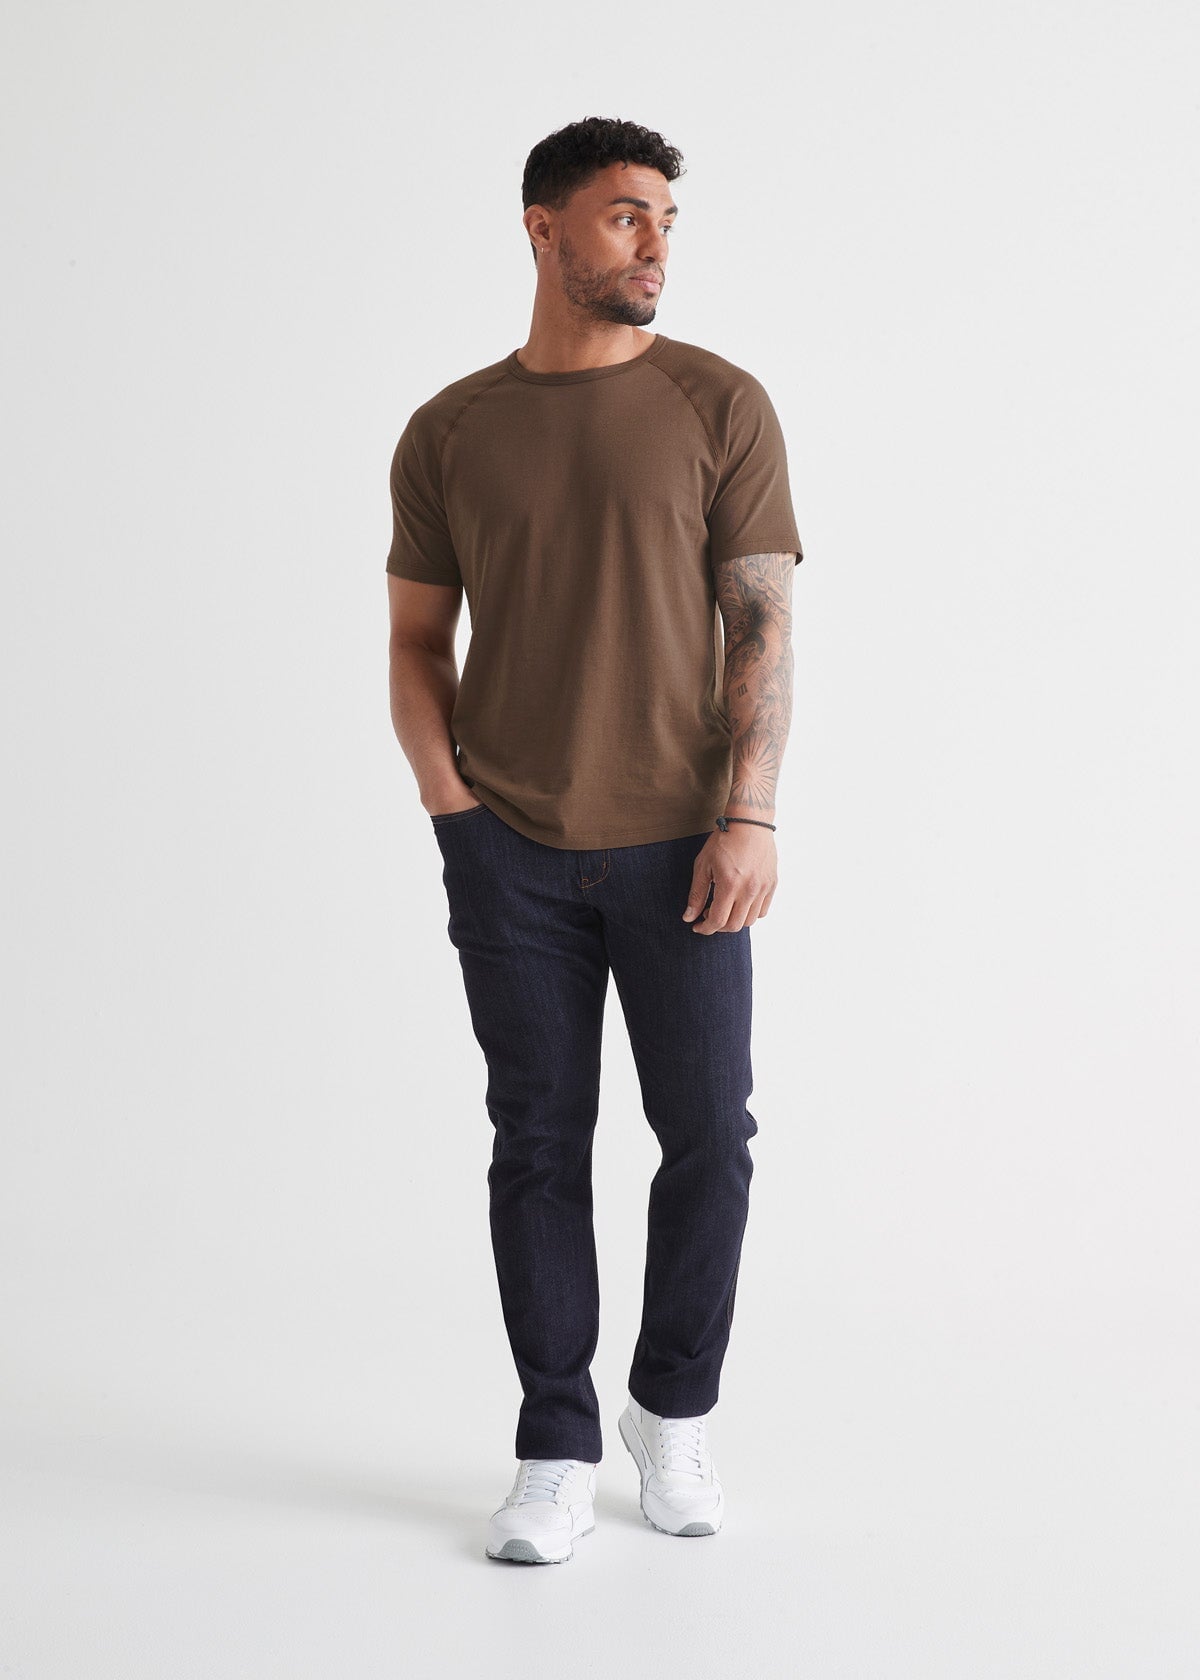 mens brown soft midweight tee full body